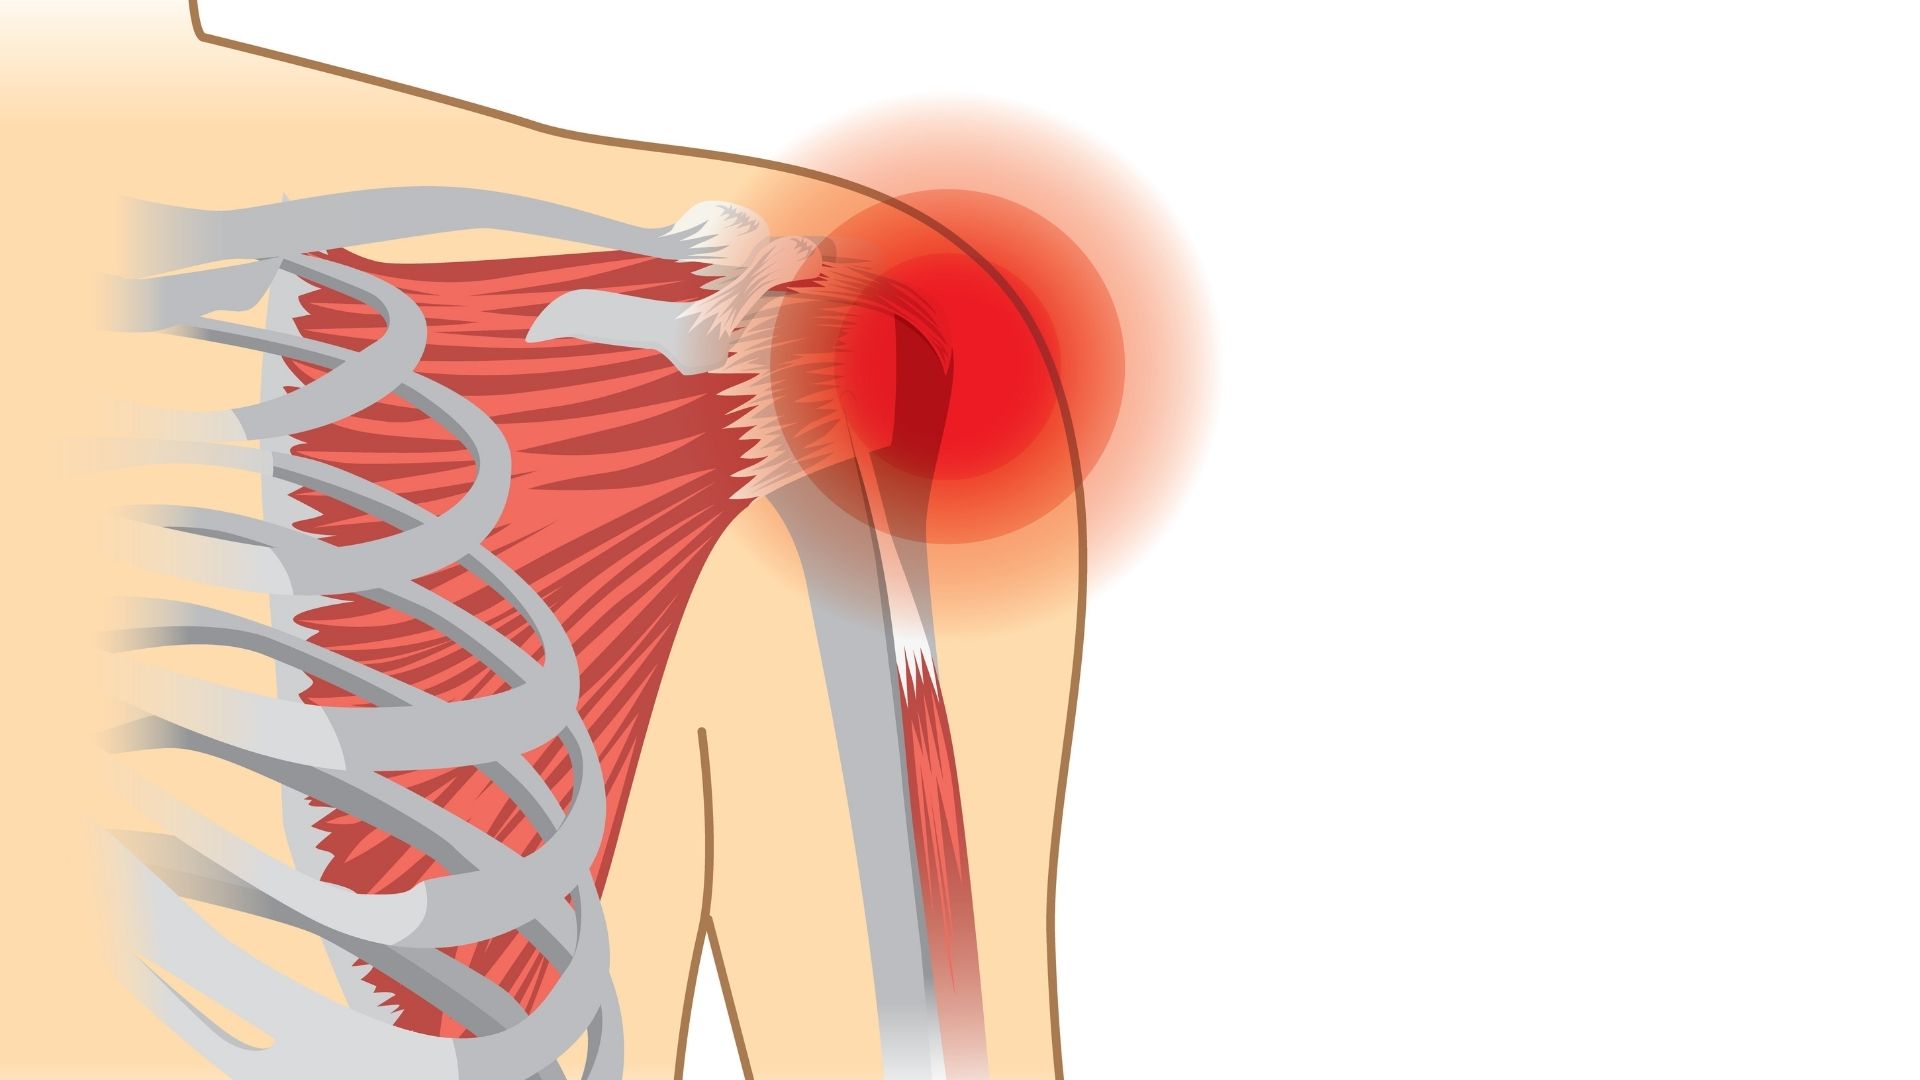 https://propelphysiotherapy.com/wp-content/uploads/2022/01/rotator-cuff-tear-symptoms-treatment-propel-physiotherapy.jpg